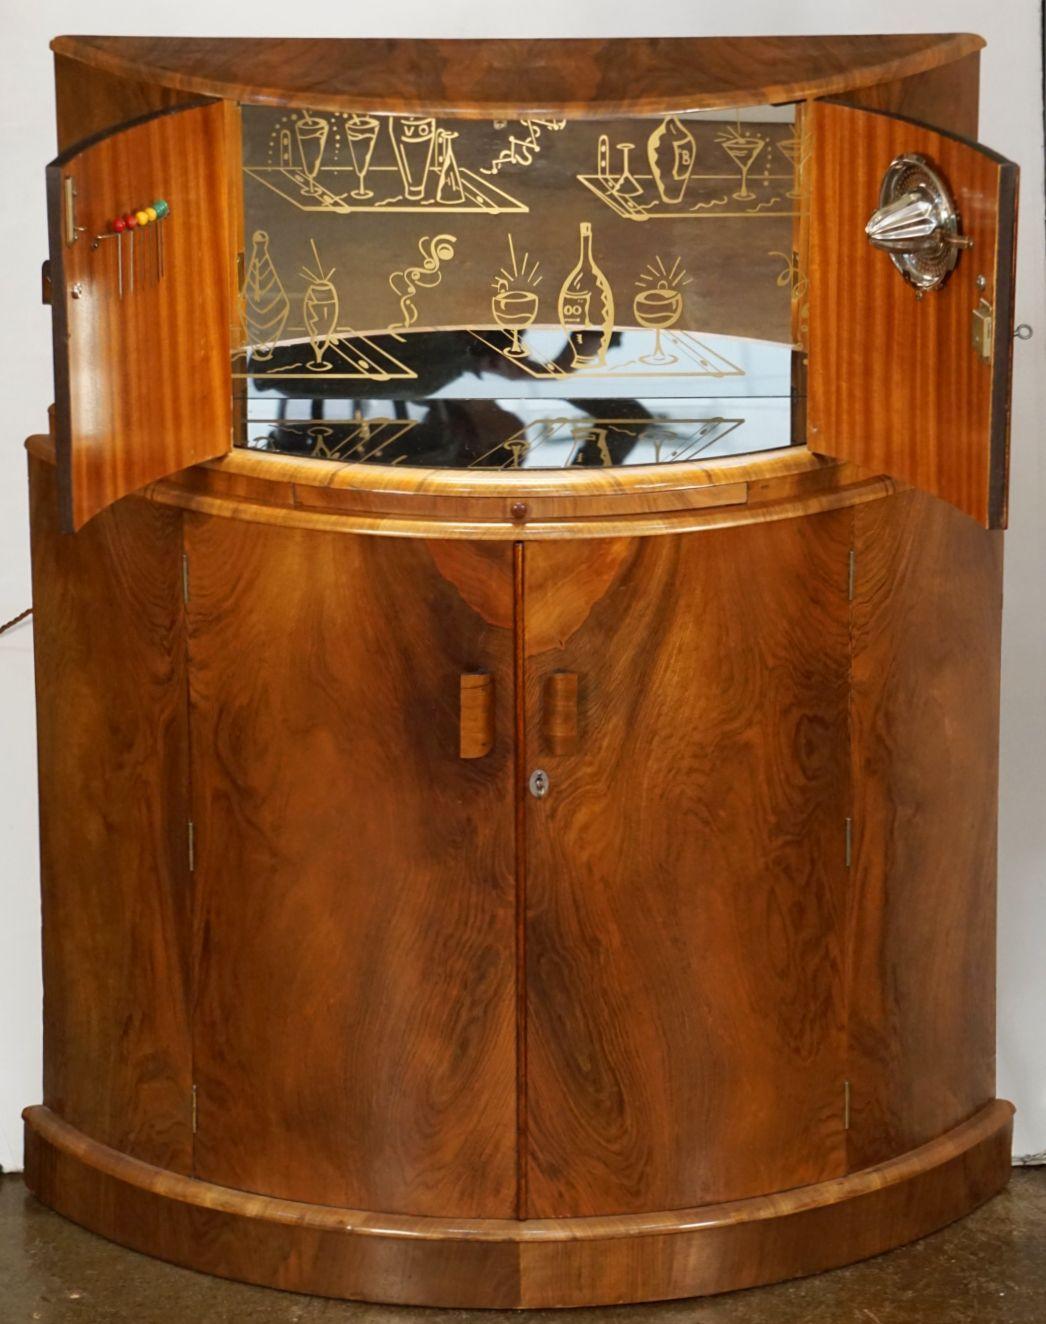 A fine French upright demi-lune cocktail bar cabinet or drinks cupboard of burled walnut from the Art Deco Period.

Featuring a dry bar top with pull-out slide for preparing cocktails - with two doors opening to reveal a lighted, mirrored glass